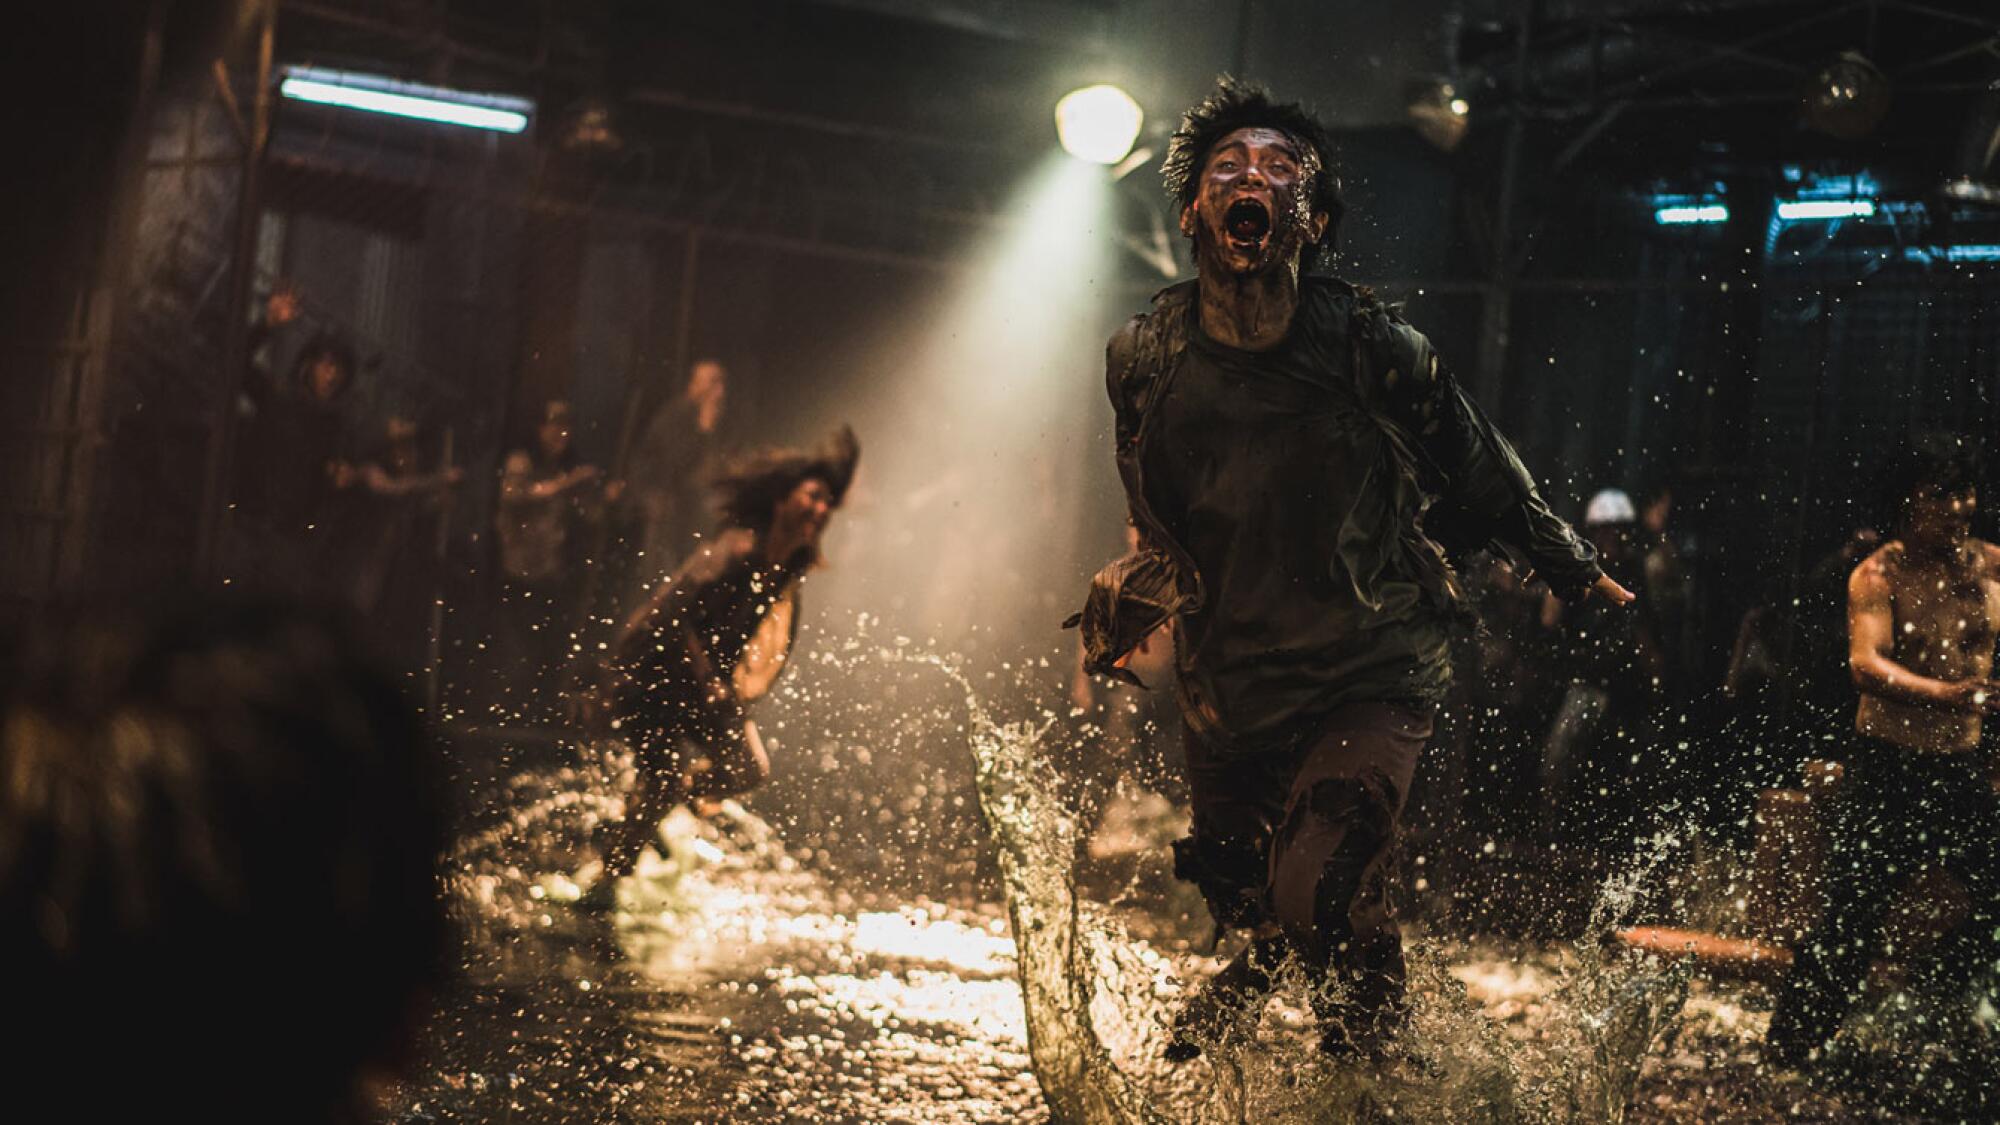 A zombie screams in a puddle of water in a scene from the movie Peninsula